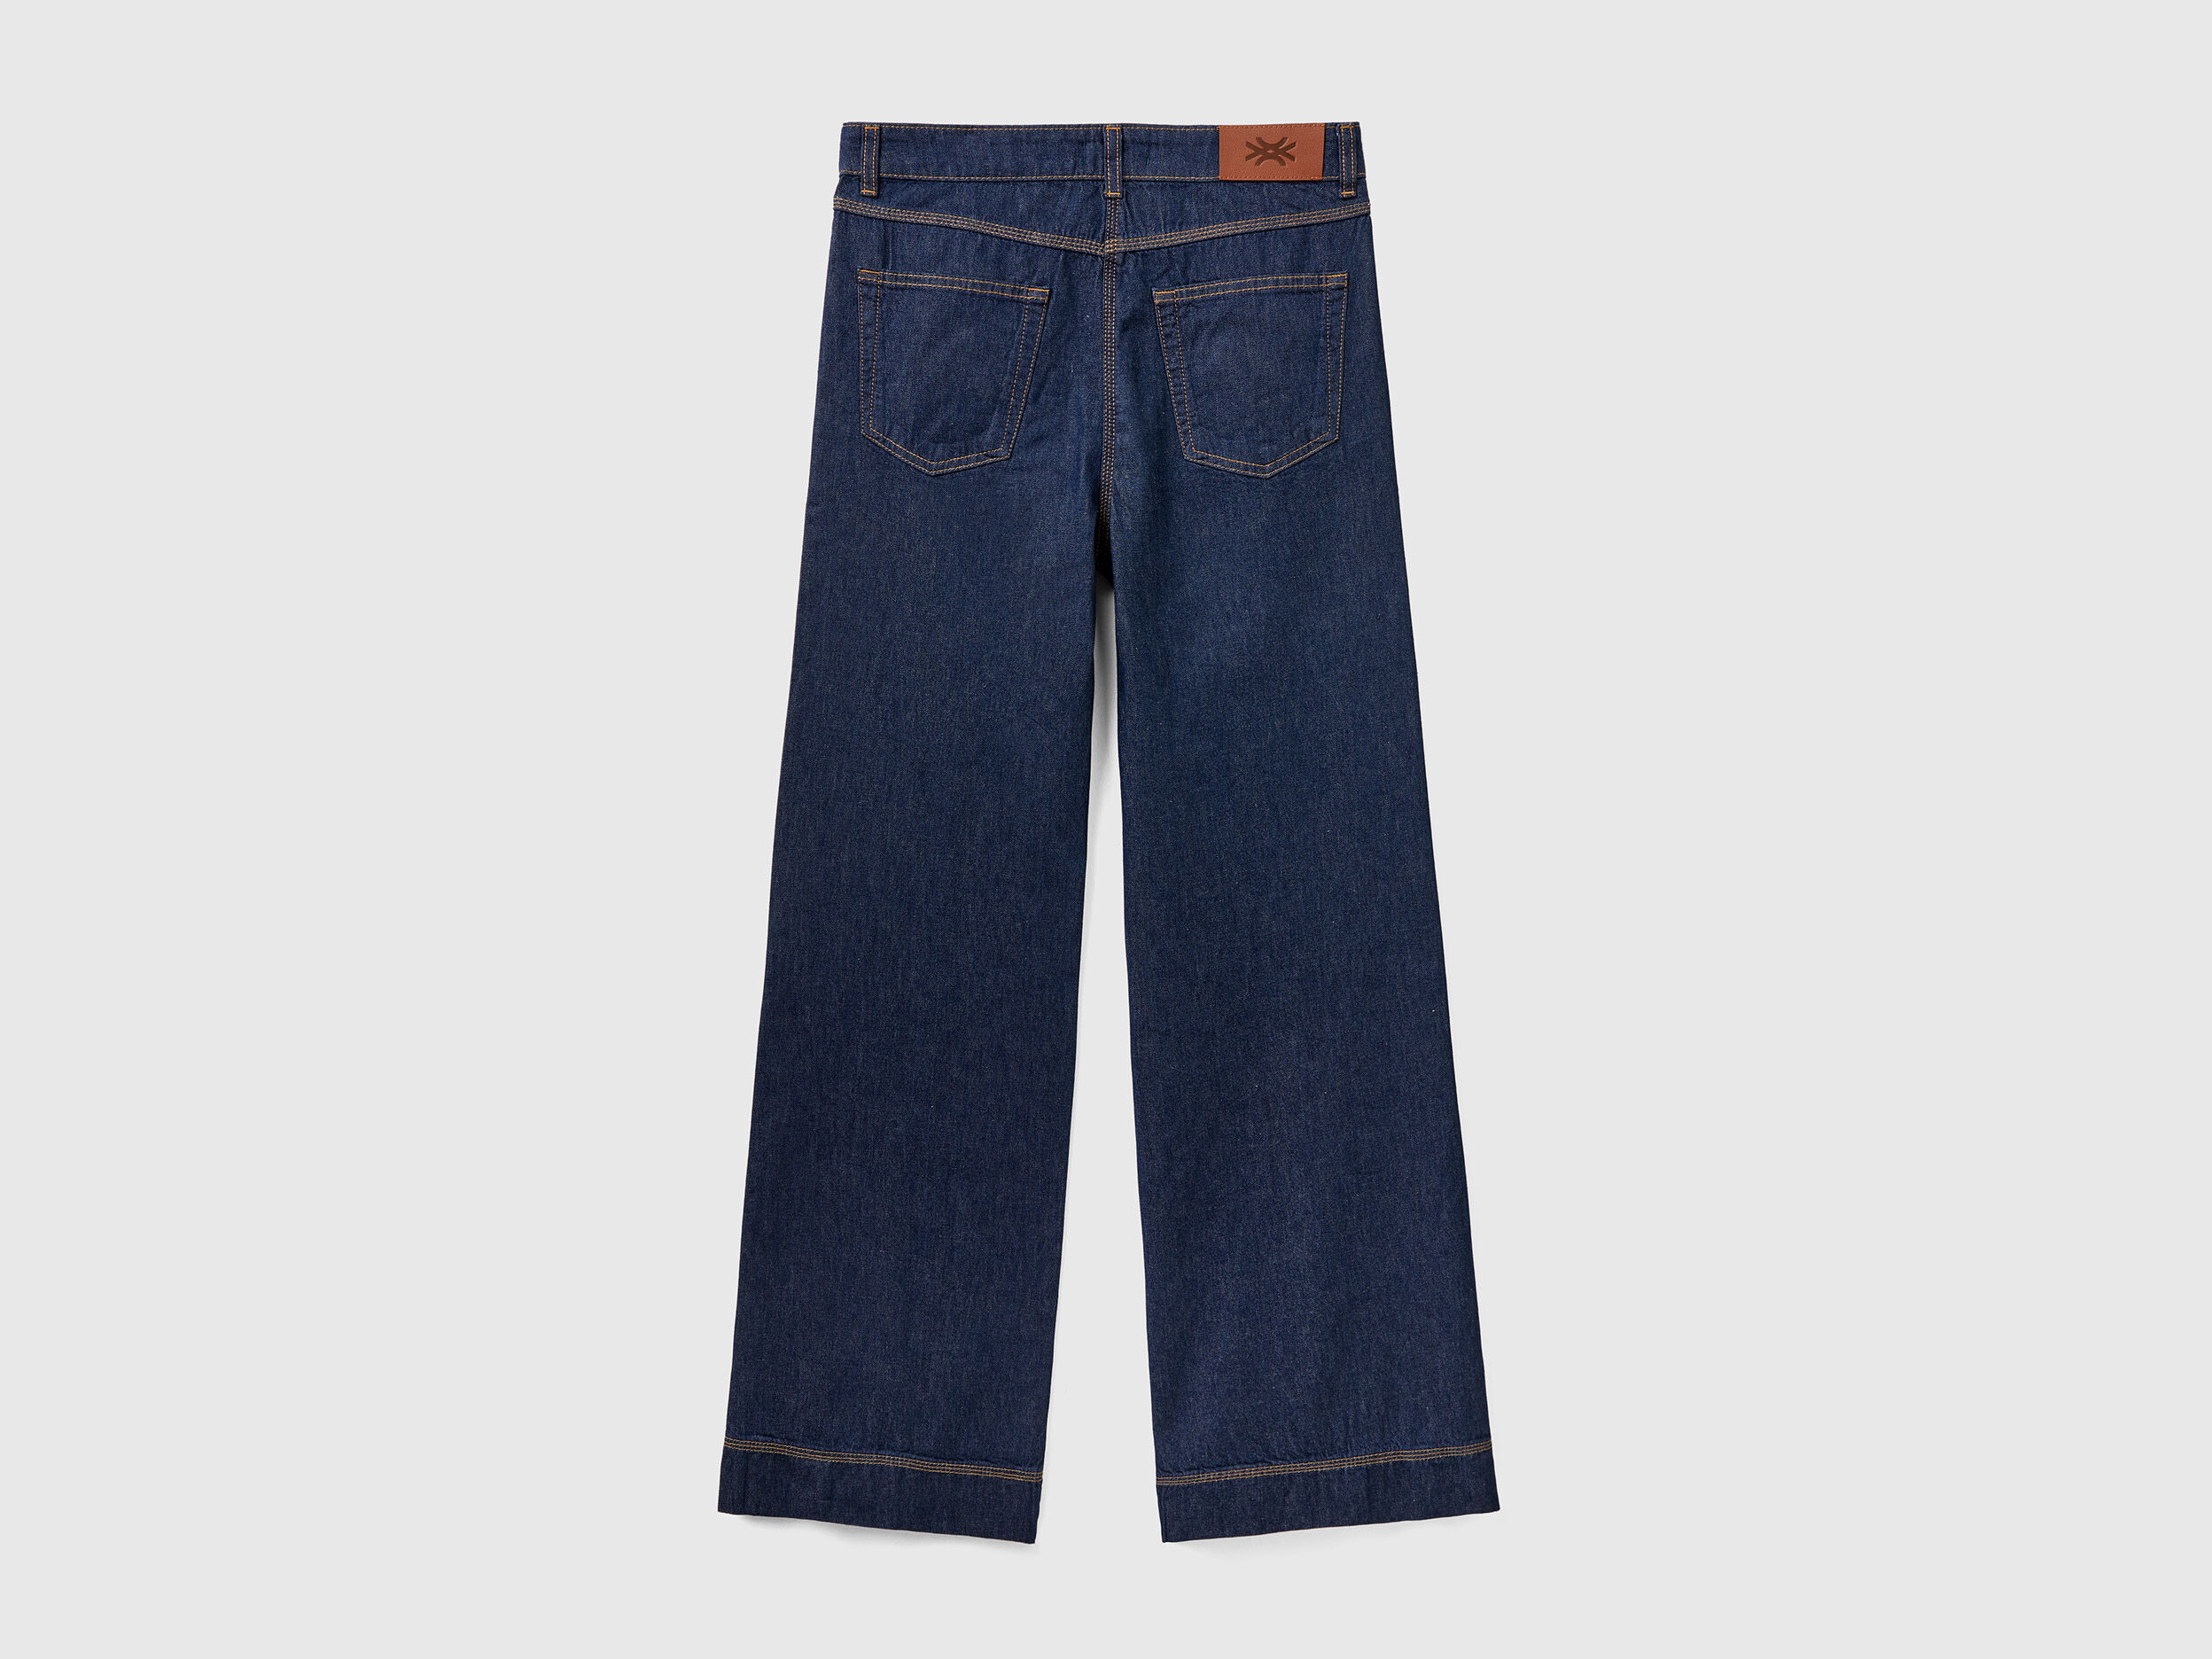 Buy LEVIS Womens 5 Pocket Coated Jeans | Shoppers Stop